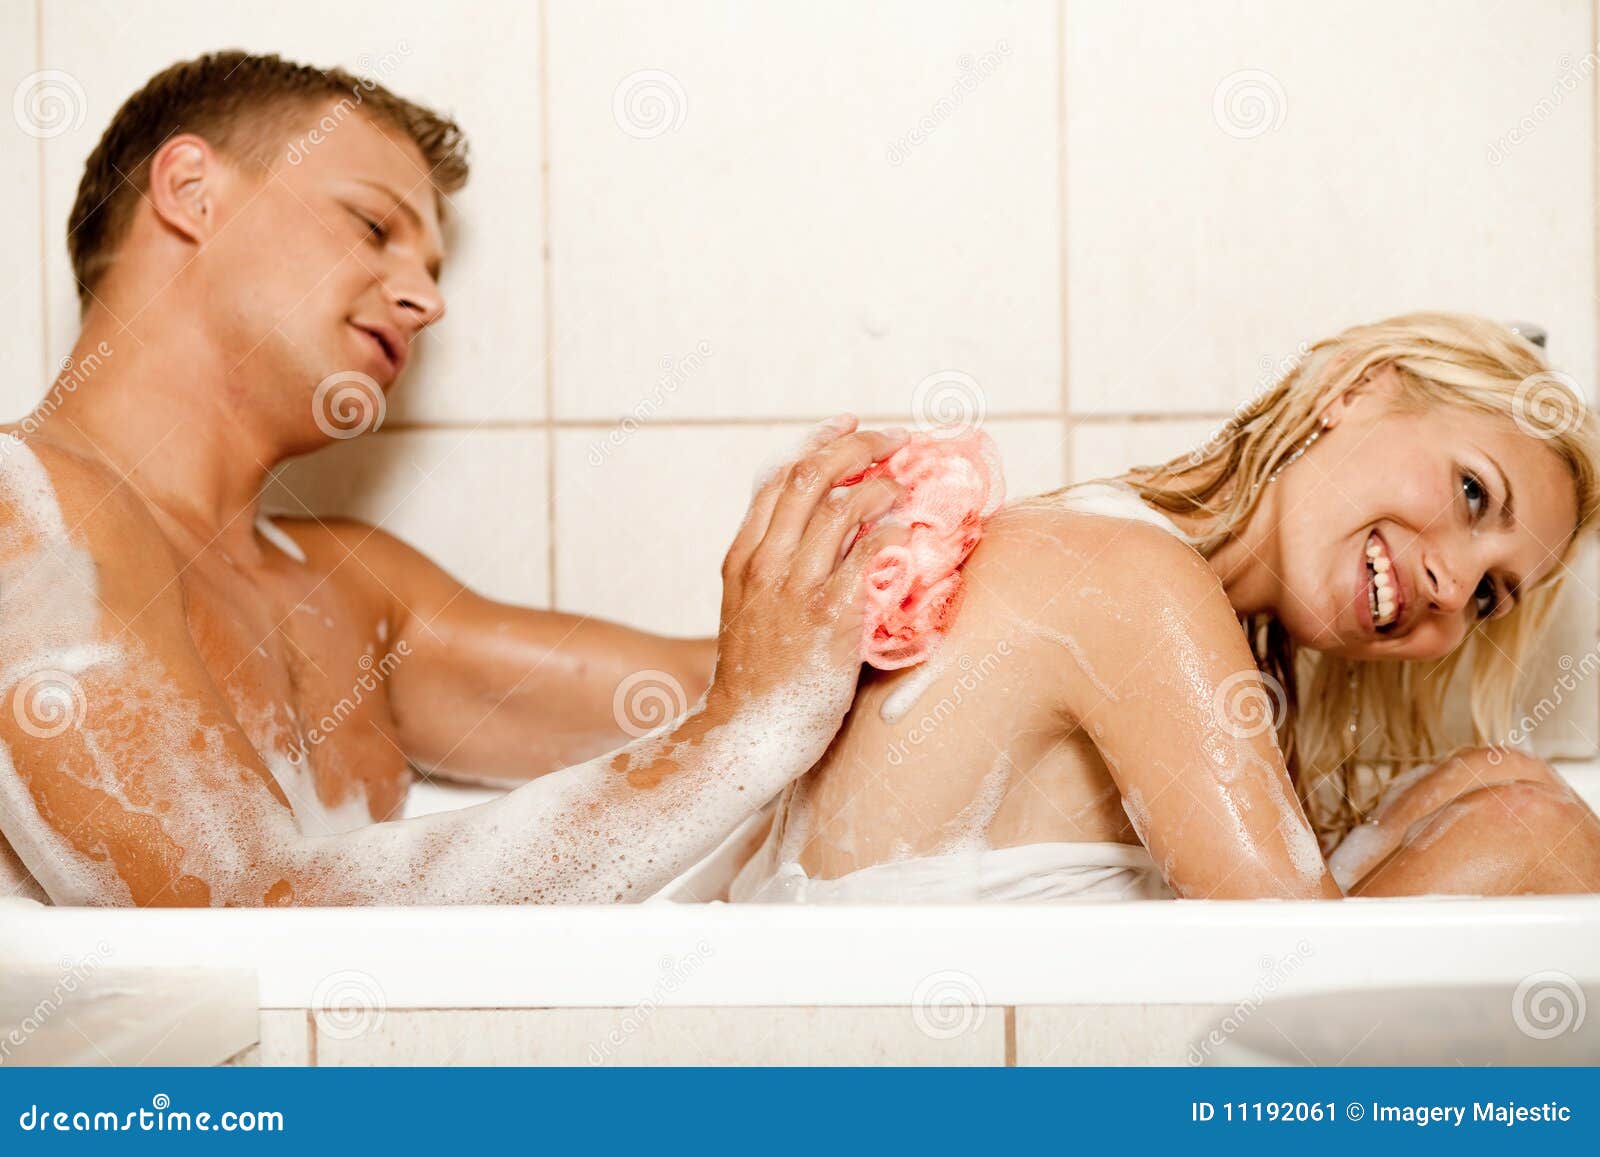 wife of bath sexual imagery